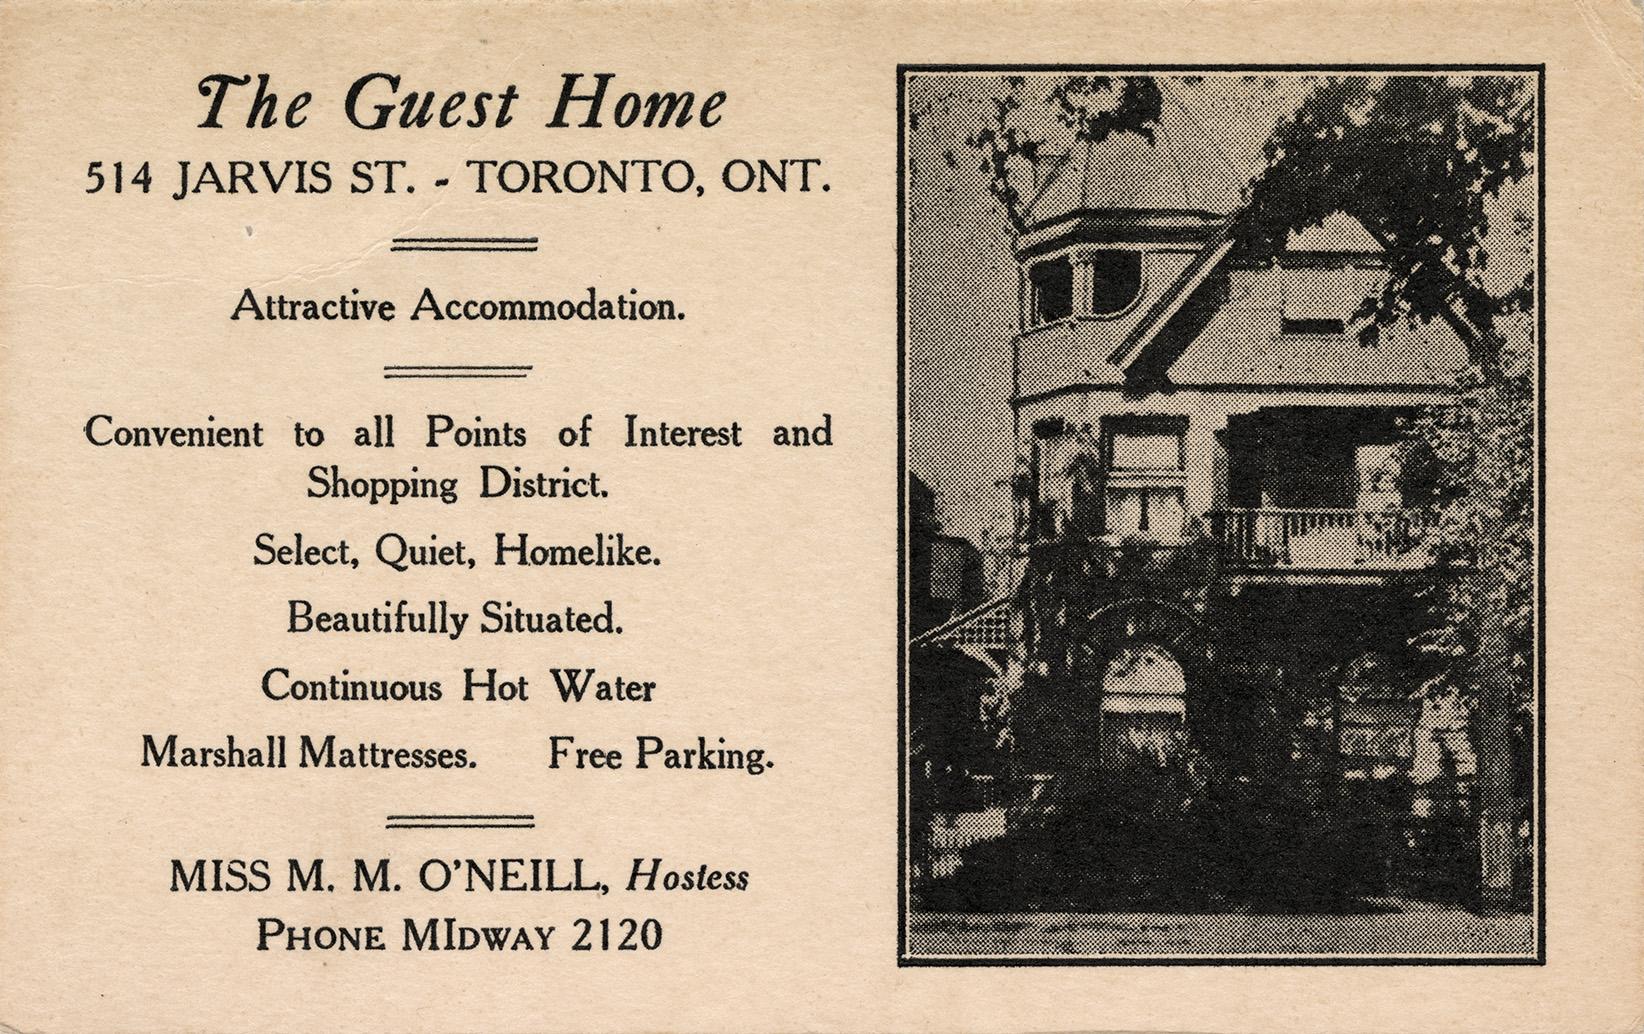 The Guest Home 514 Jarvis St. - Toronto, Ont.